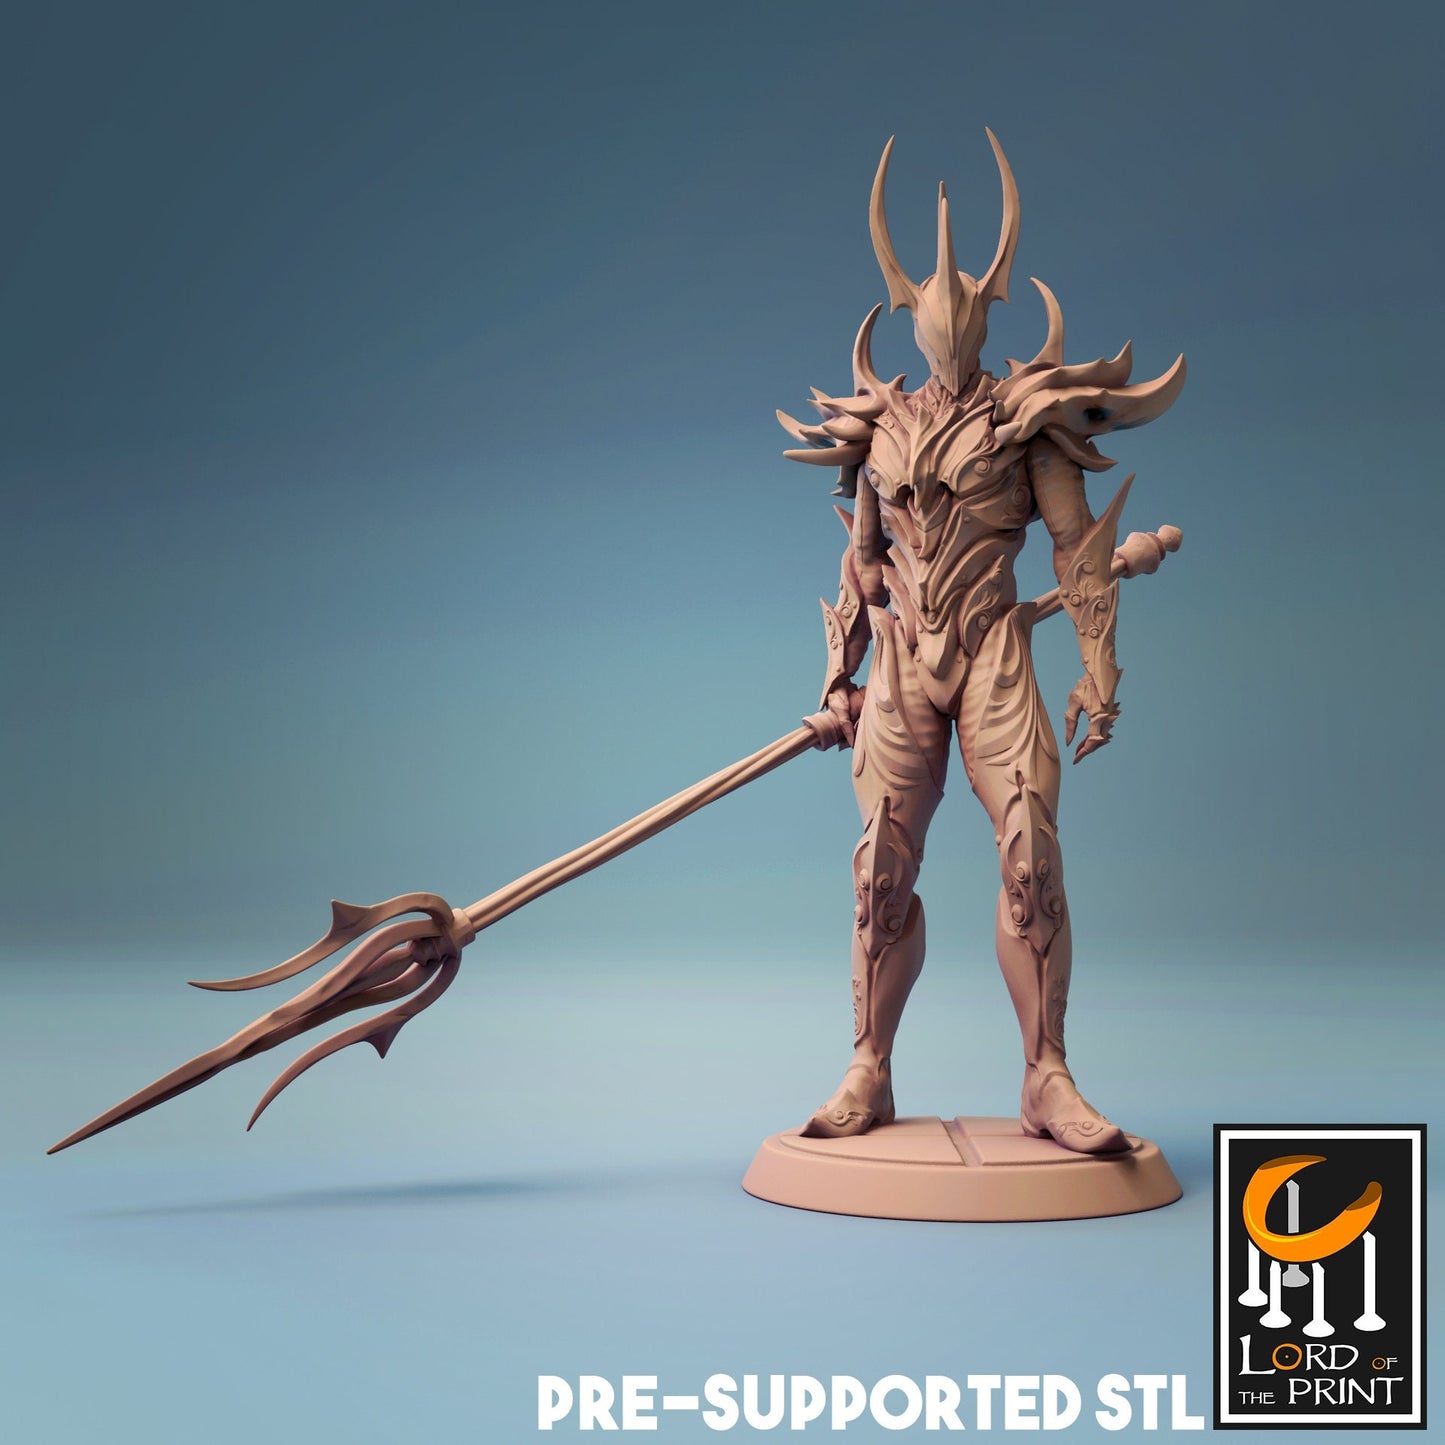 Male Human Fighter D&D miniature, by Lord of the Print // 3D Print on Demand / DnD / Pathfinder / RPG